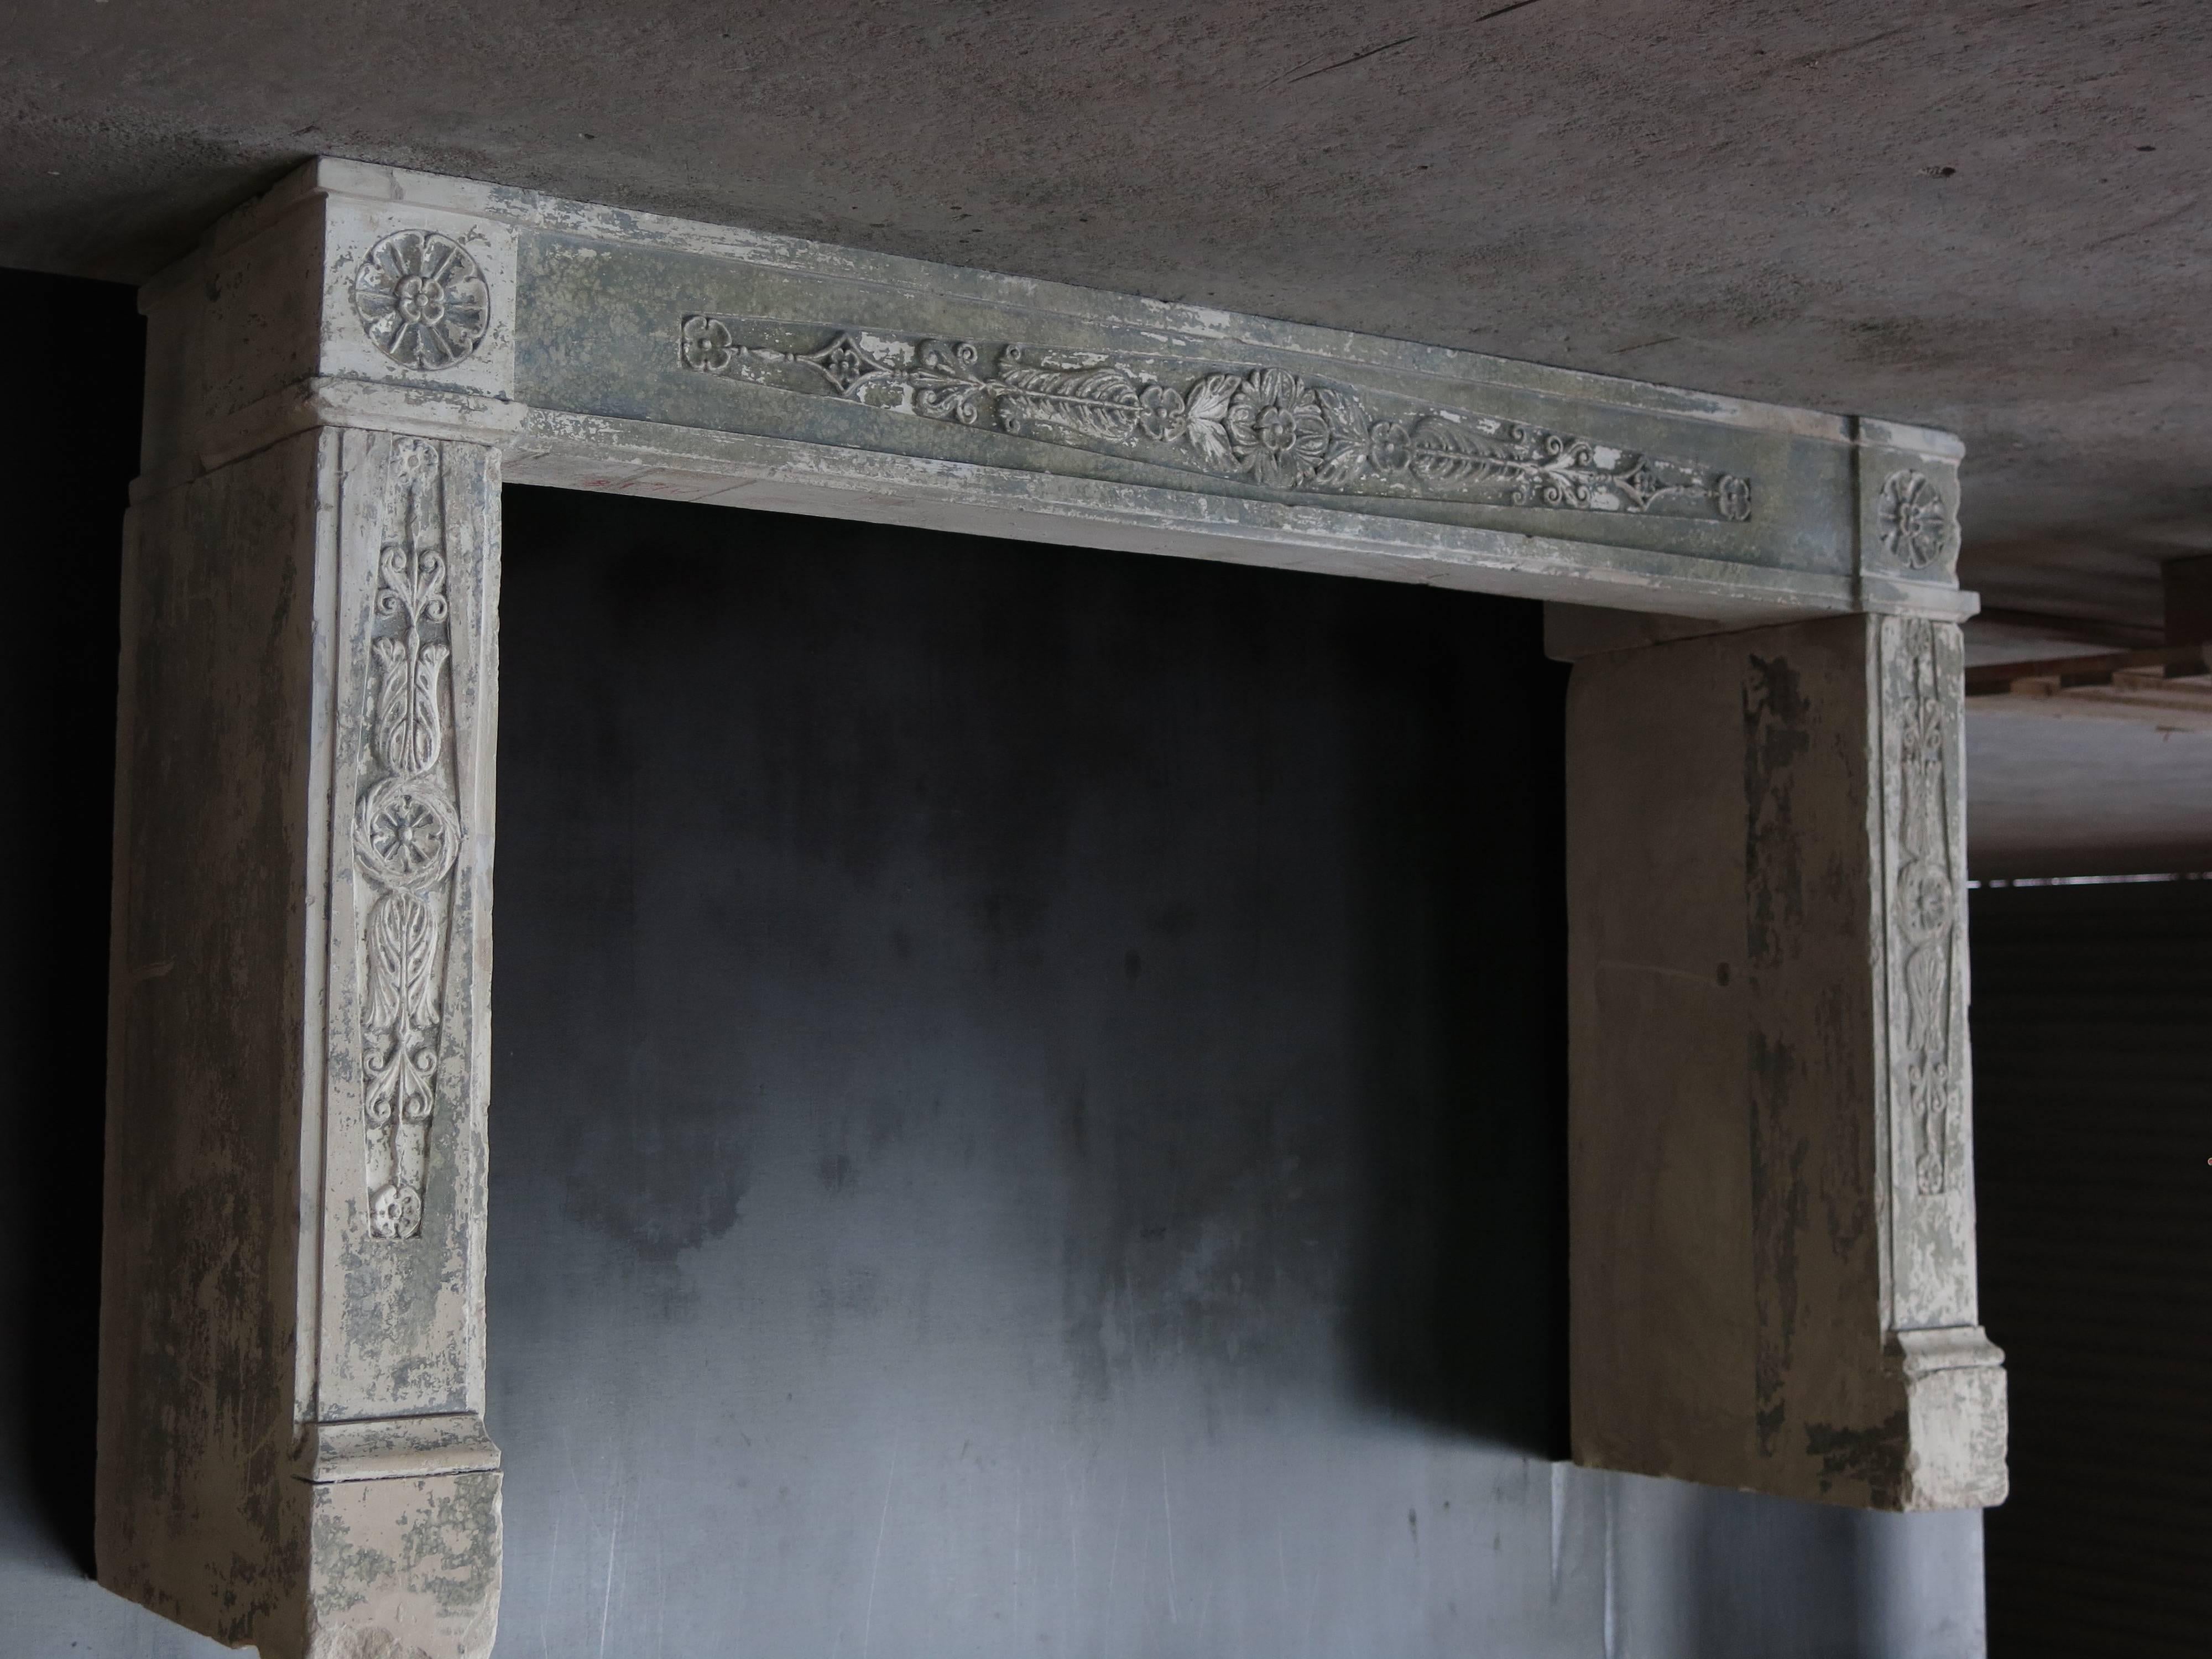 Original Normandy provenance, French antique Louis XVI period fireplace, hand carved in the 18th century, circa 1790s, France.
Excellent fine quality of sculptures on mantel and legs, with rosaces and flowers carving, fine art.
Rare and unique.